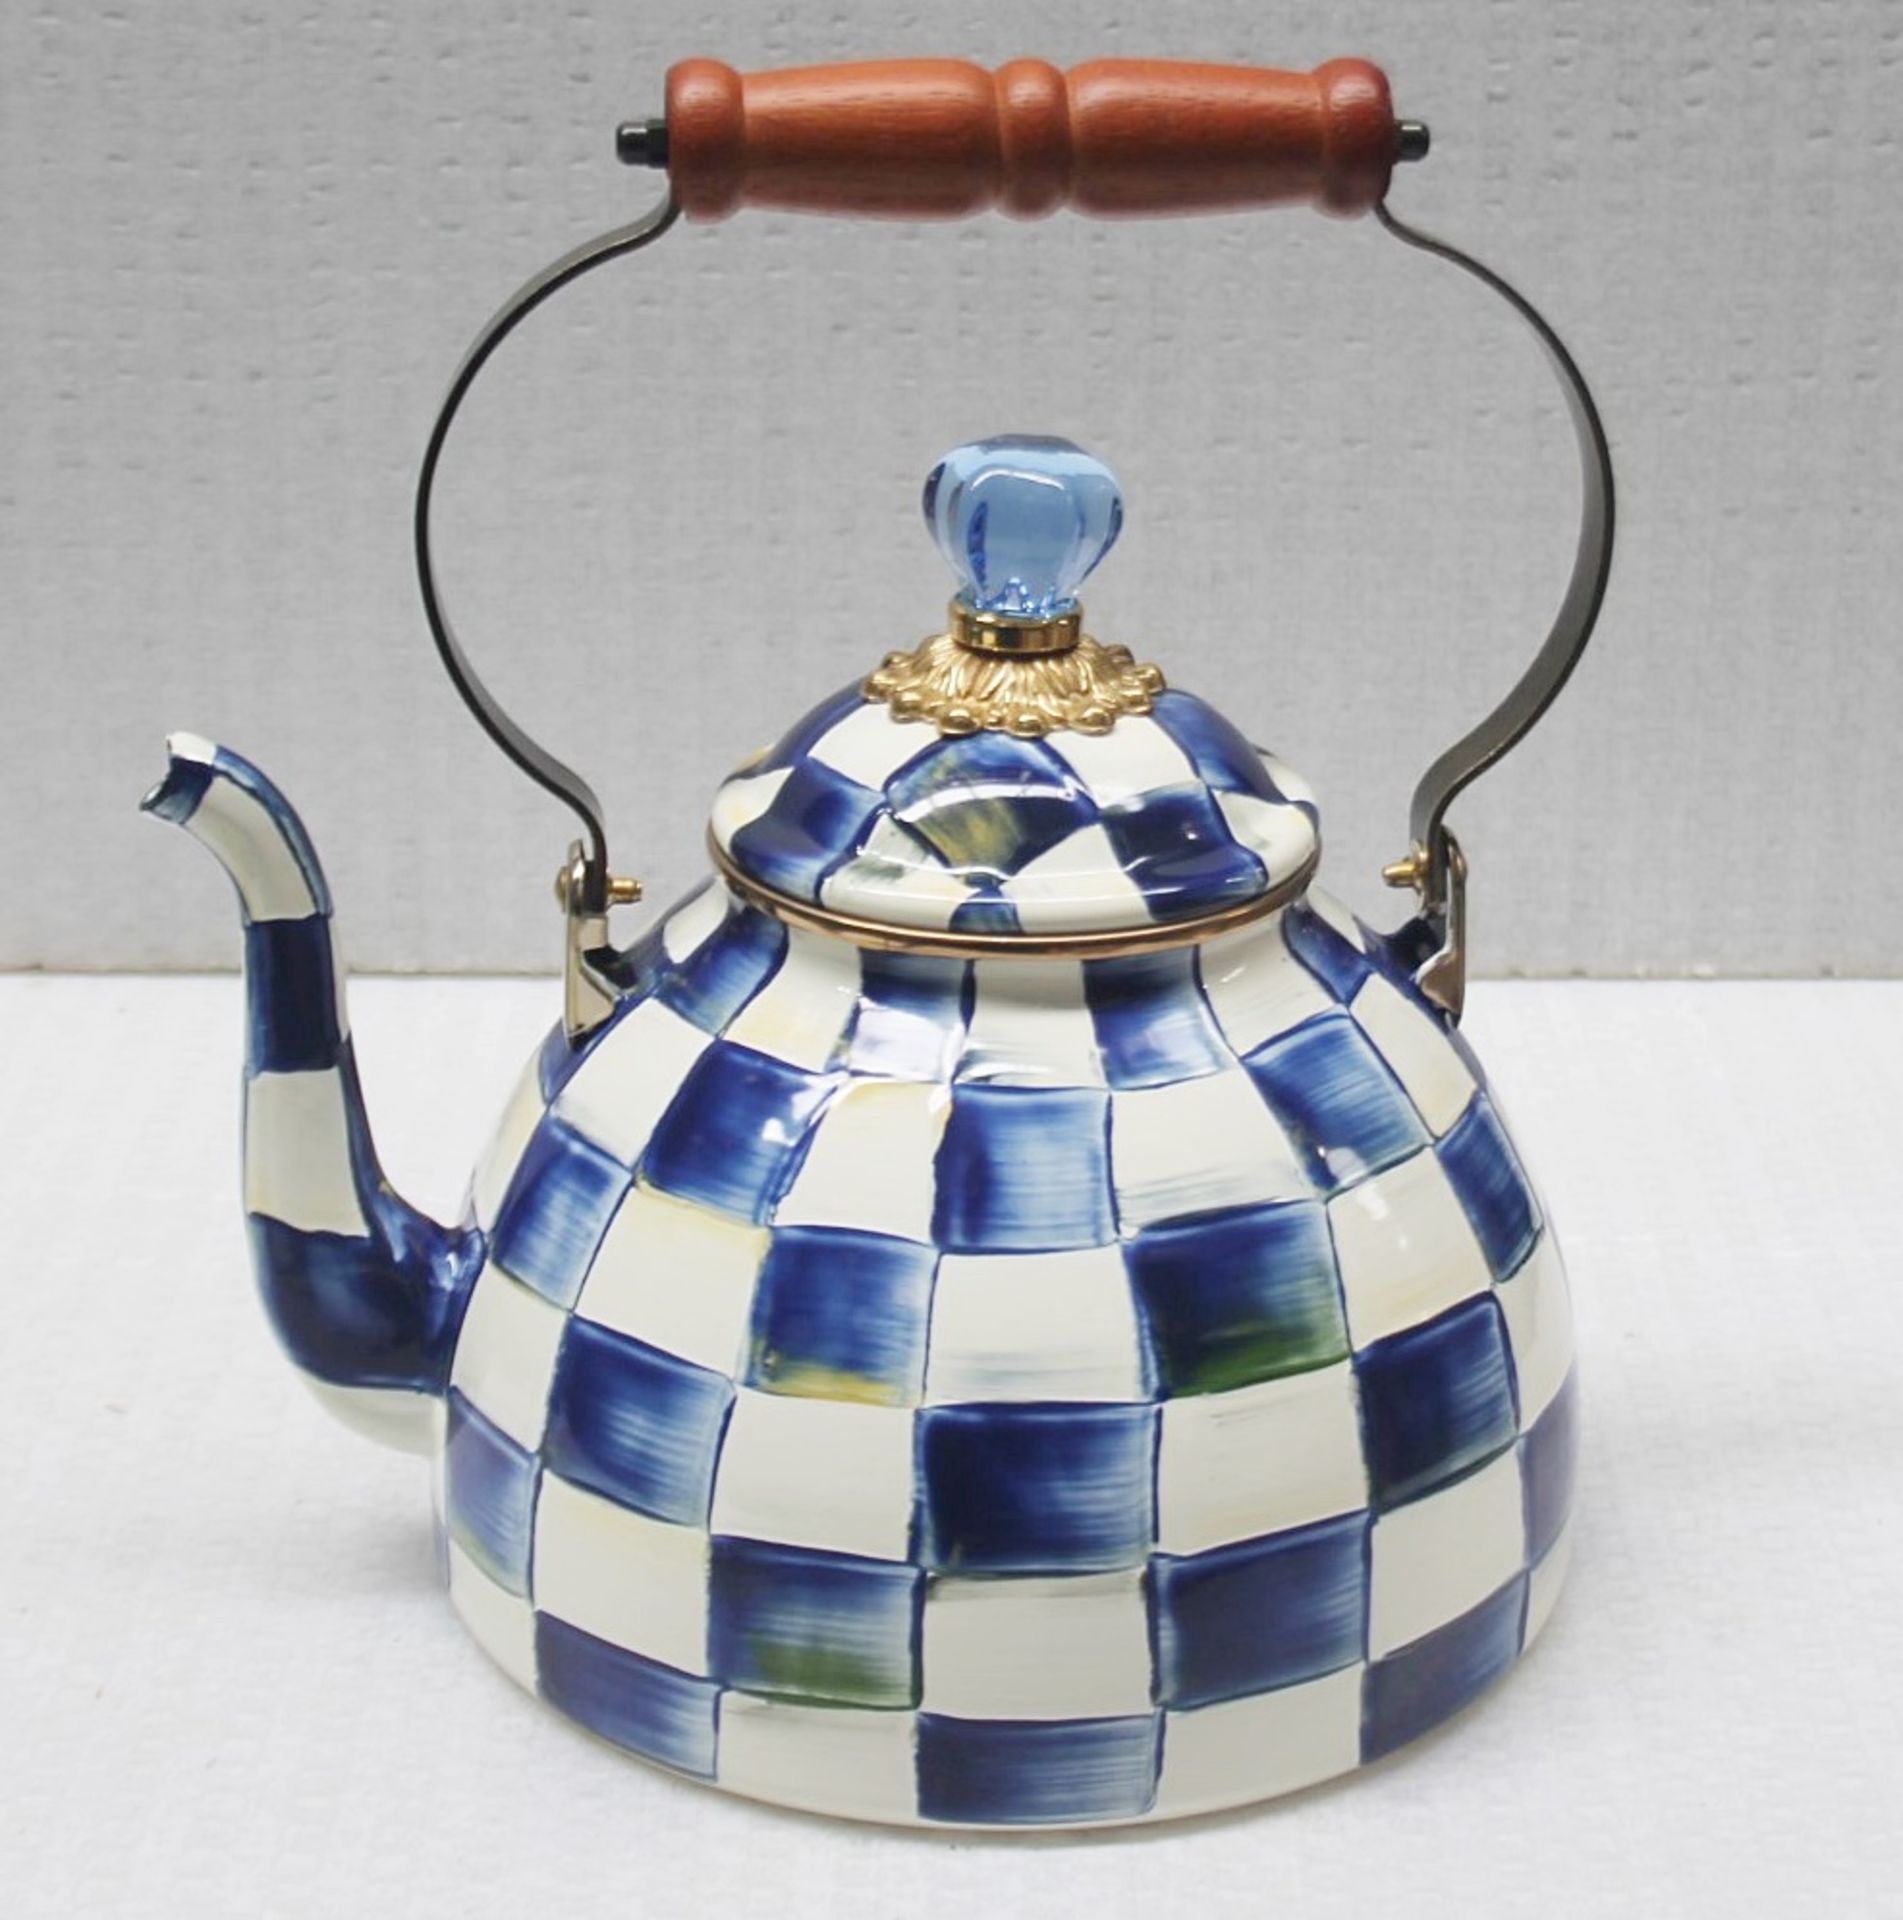 1 x MACKENZIE-CHILDS 'Royal Check' Hand-painted Tea Kettle - Original Price £180.00 - Image 2 of 8